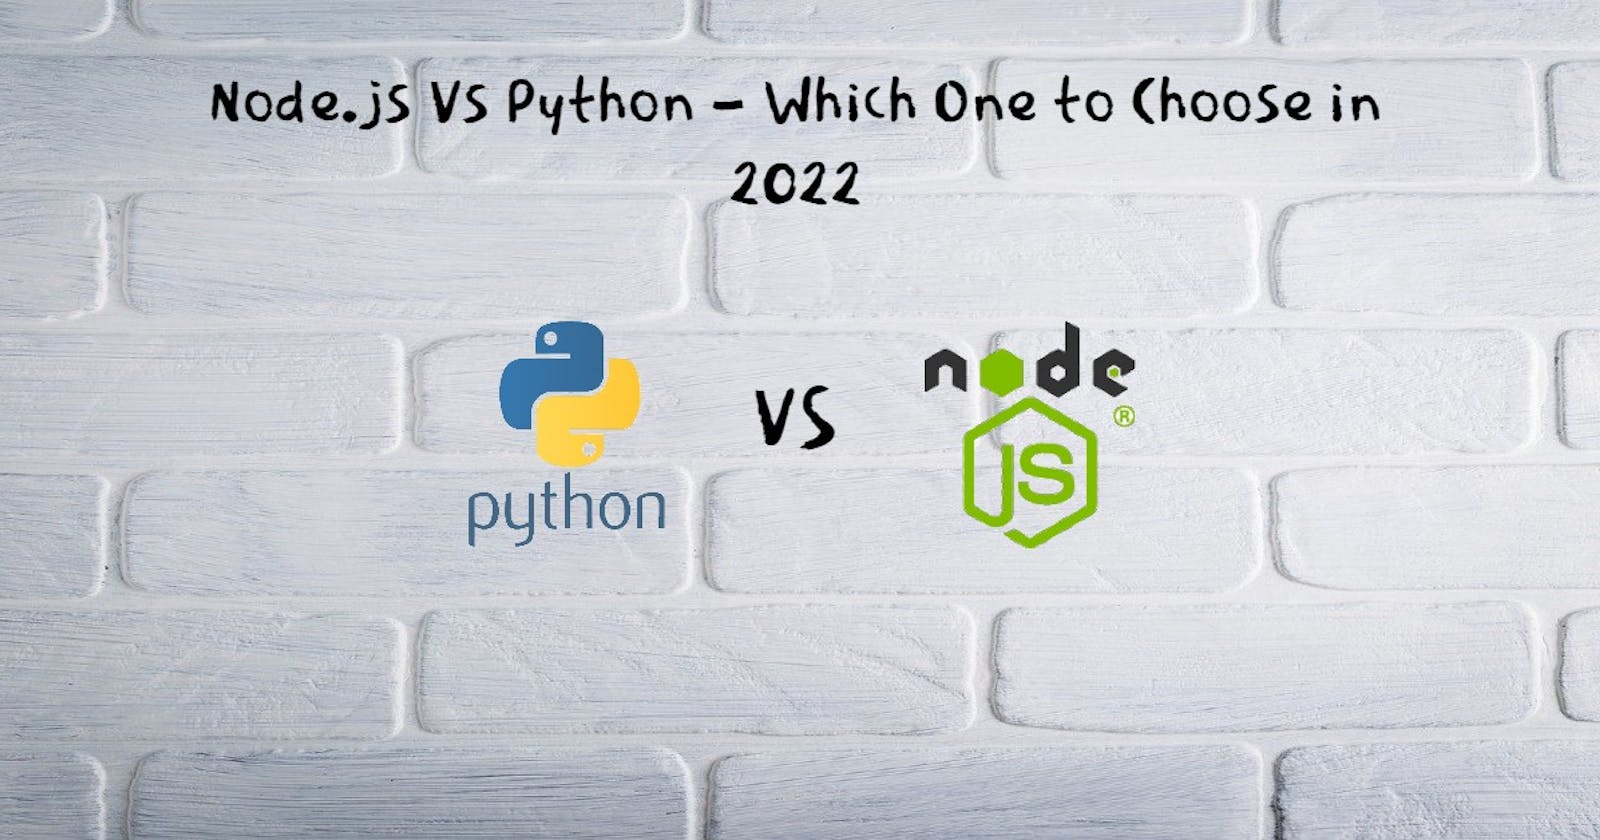 Node.js vs Python - Which One to Choose in 2022?